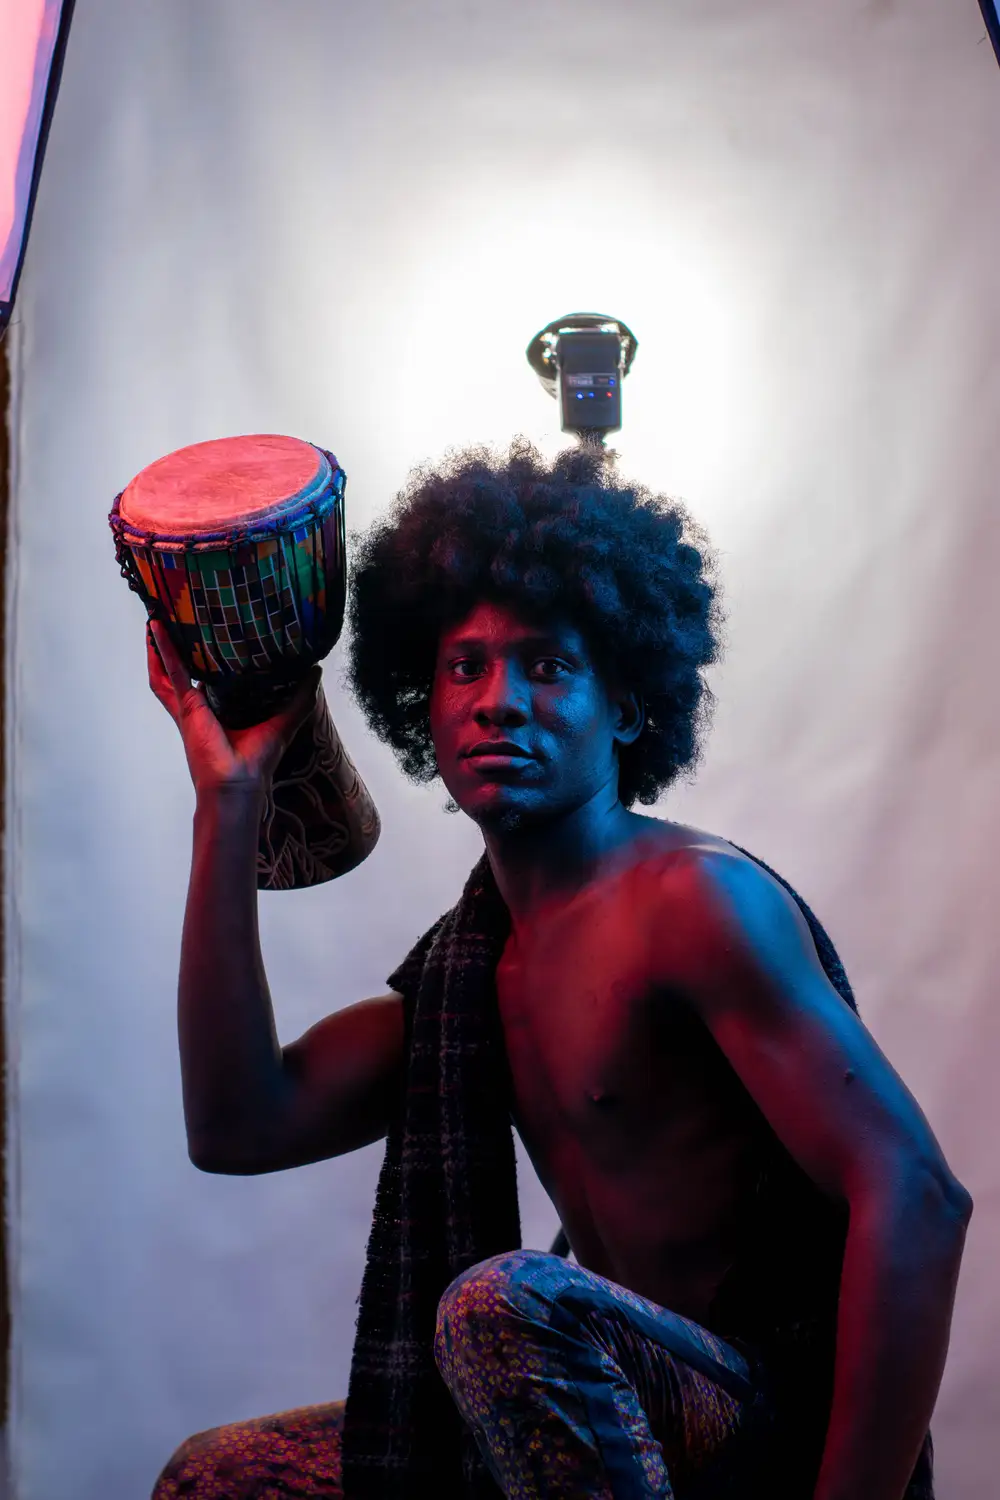 model on afro hairstyle raises his drum with one hand